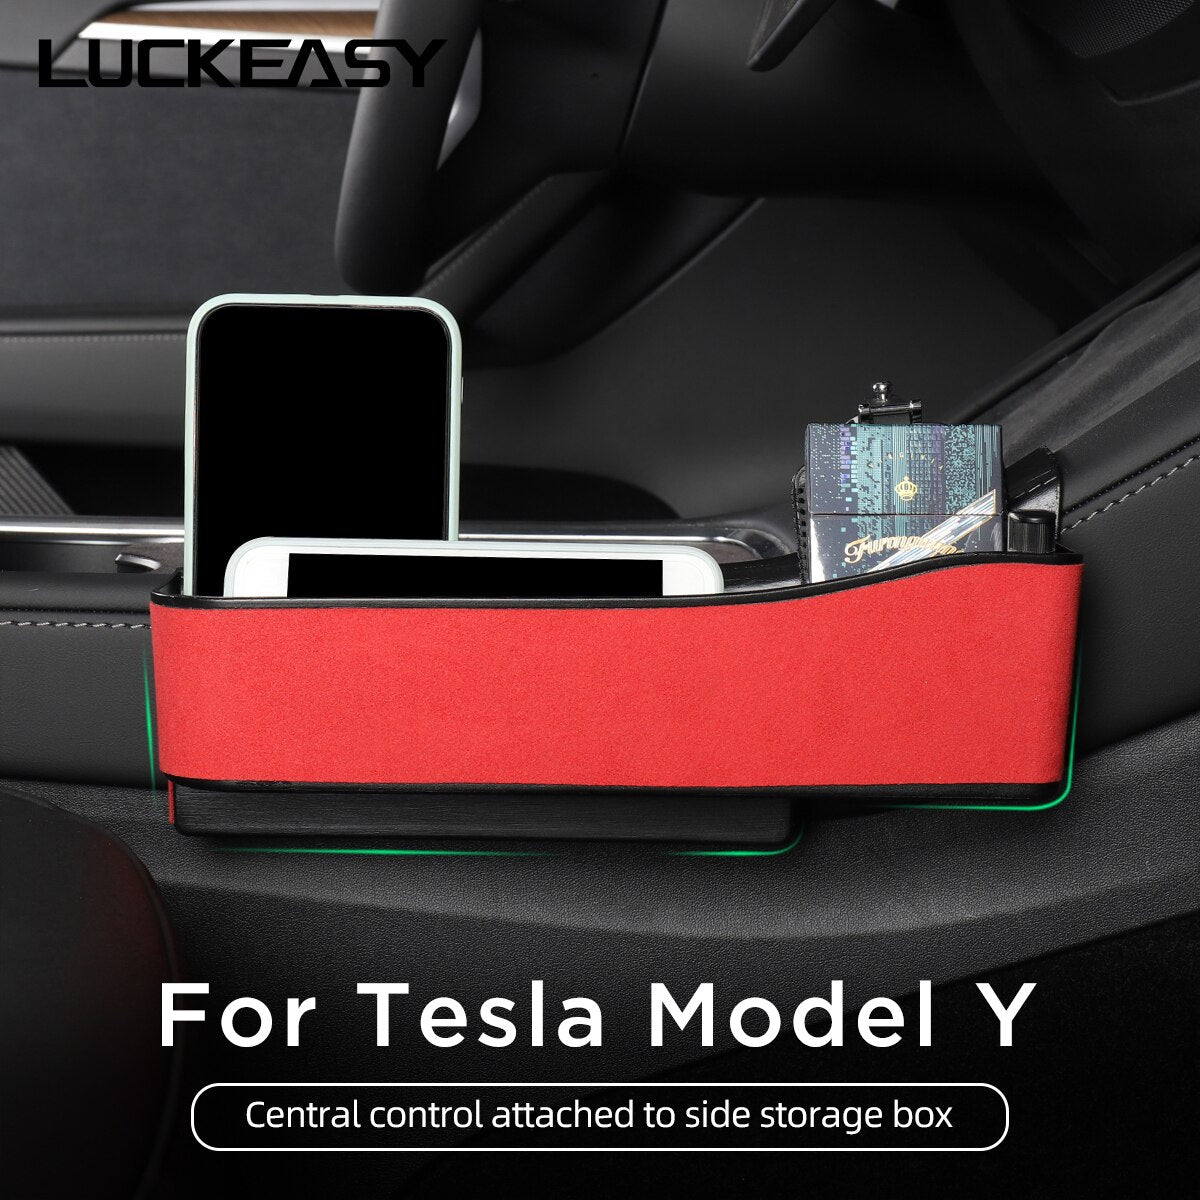 For Tesla Model 3 Y 2021-2023 Car Seat Crevice Storage Box Central Control Hanging Side Container Box Auto Interior Accessories